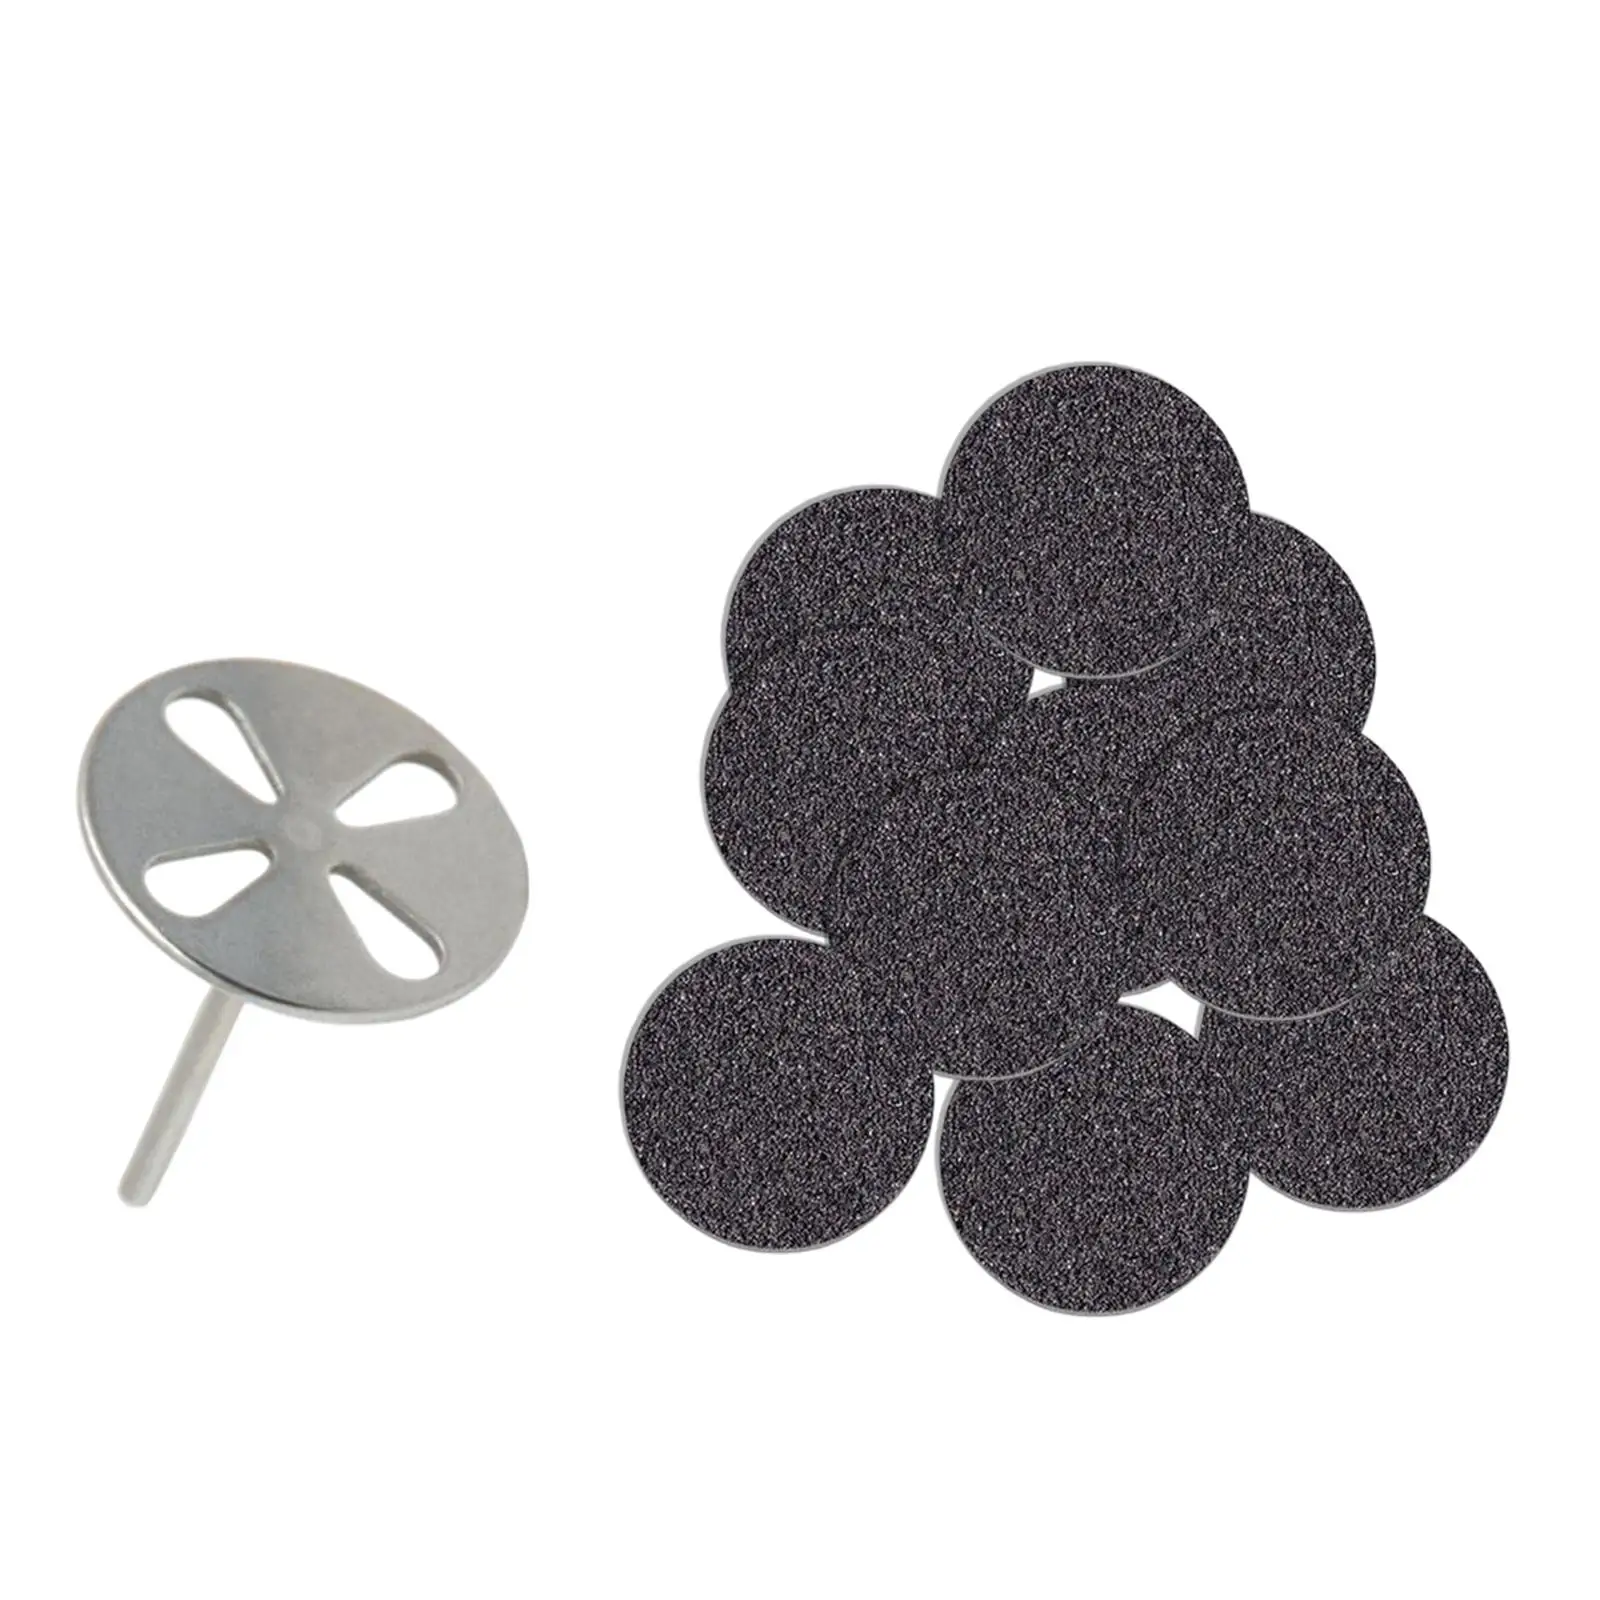 100x Sand Papers Grinding Disc Tool Replaceable Pads for Electric Foot File Pedicure Quick Shortening Nails Cracked Heels Tool